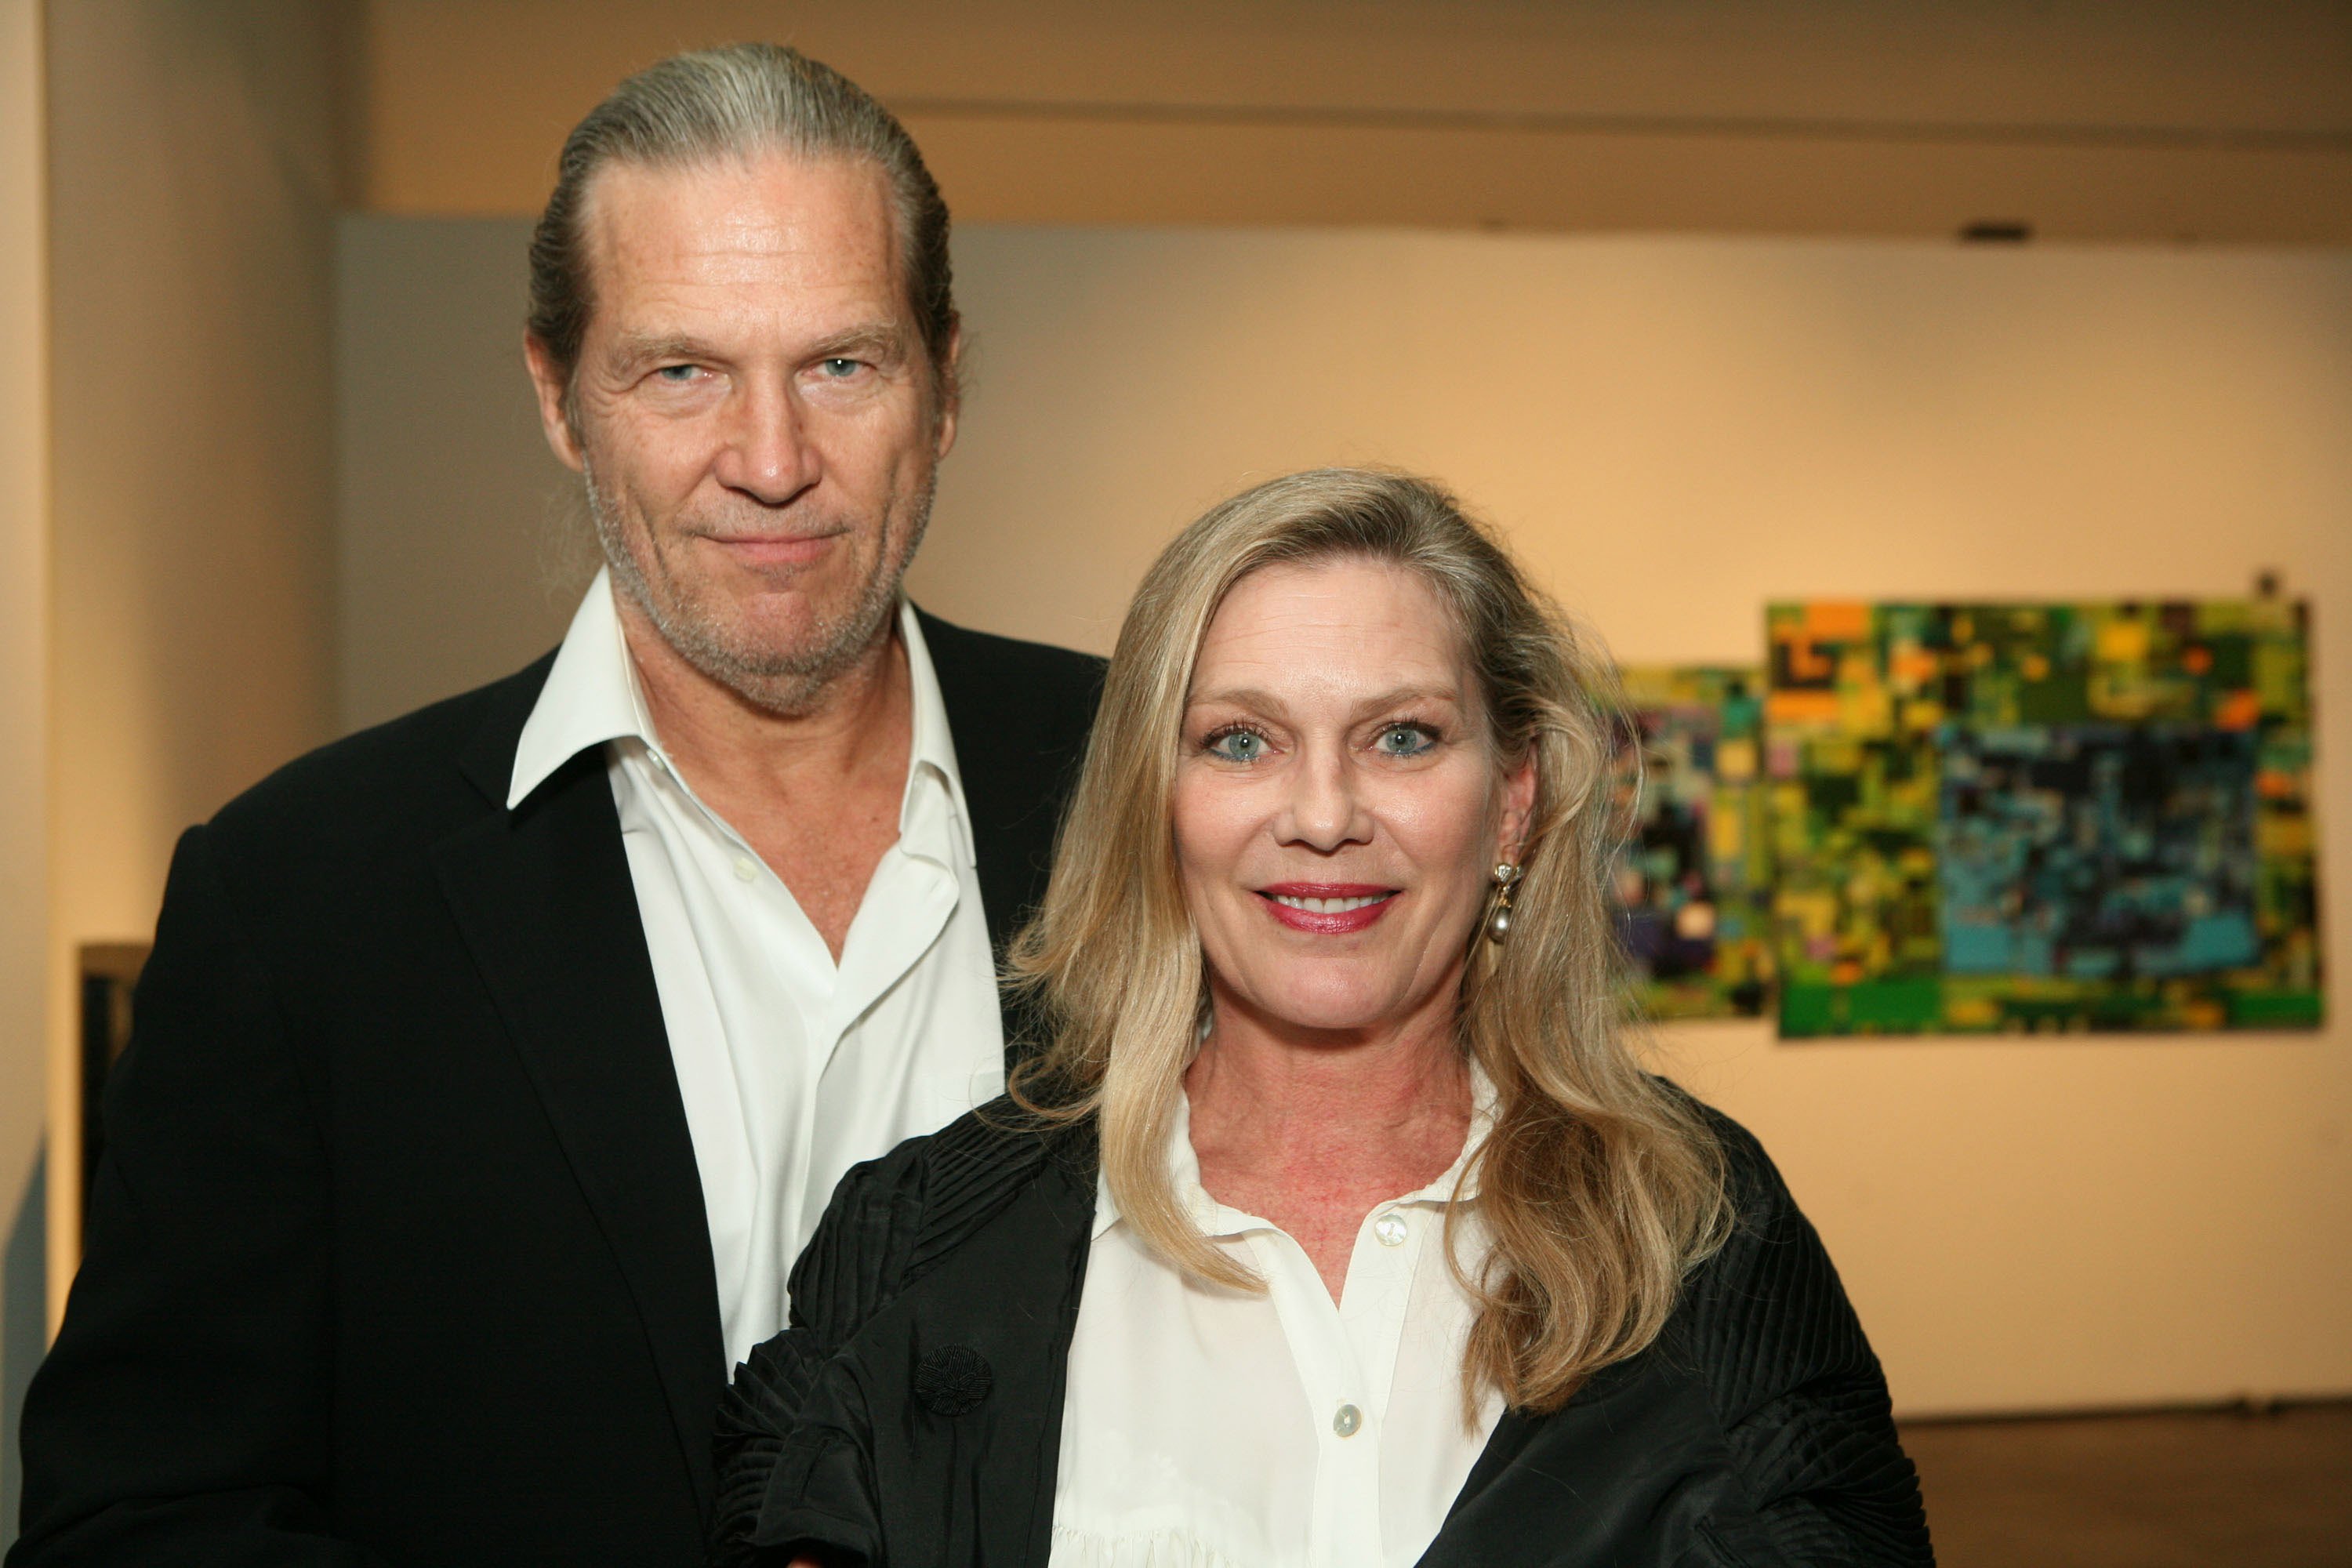 Jeff and Susan Bridges at the premiere of "Nothing But The Truth" at the Santa Barbara International Film Festival on January 22, 2009, in Santa Barbara, California | Source: Getty Images